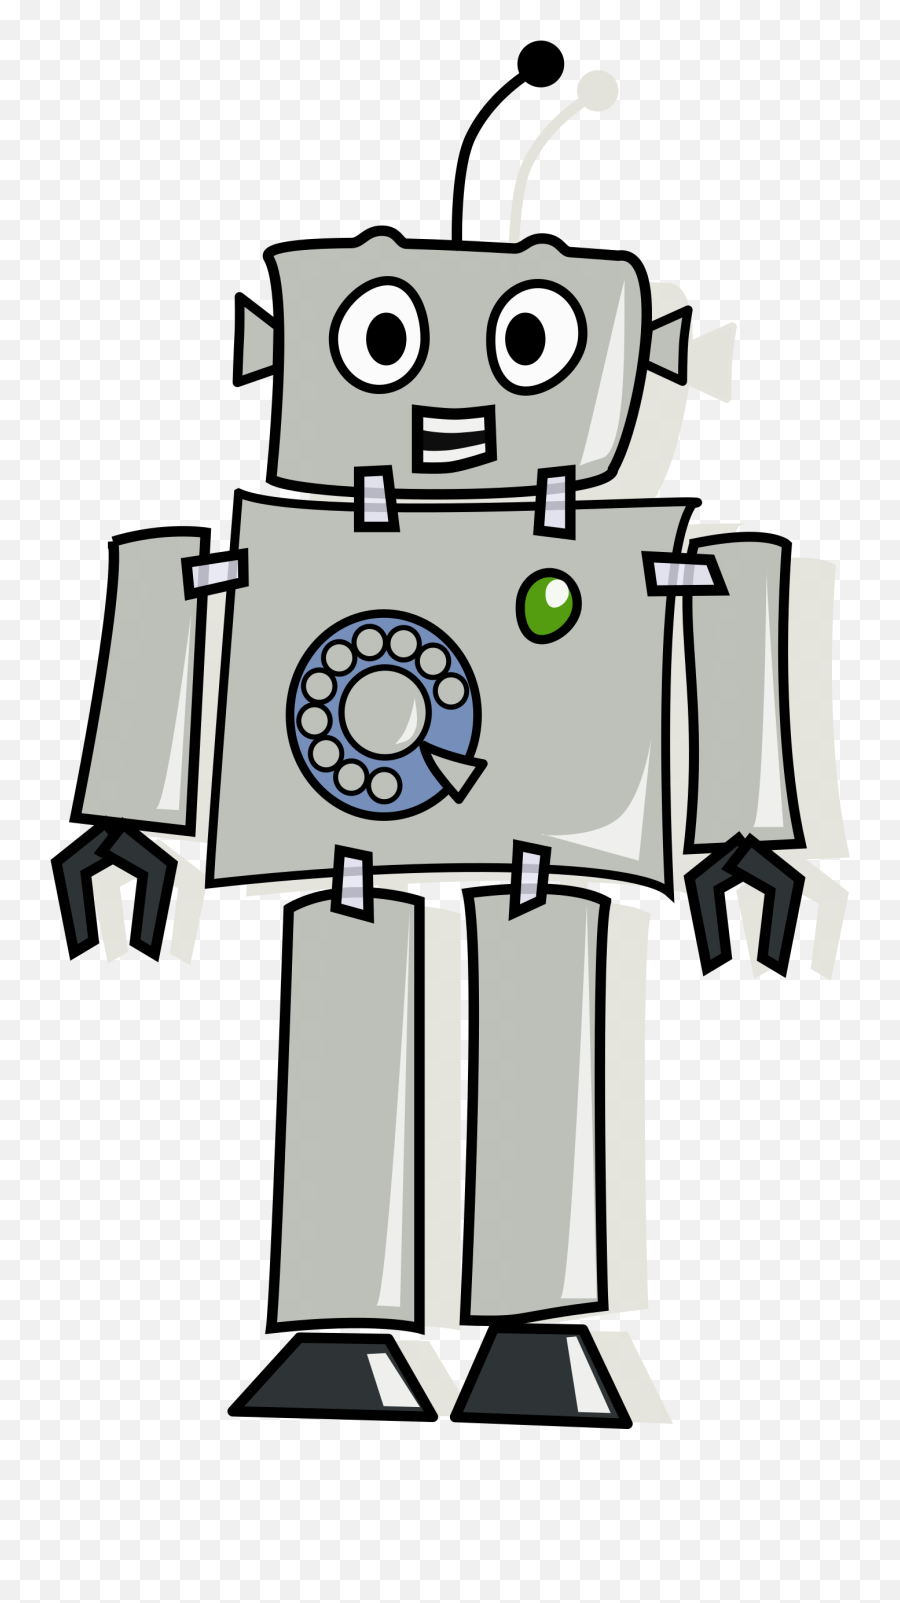 Free Robot Clipart Png Download Free Clip Art Free Clip - Roboter Clipart Kostenlos Emoji,Robot Clipart